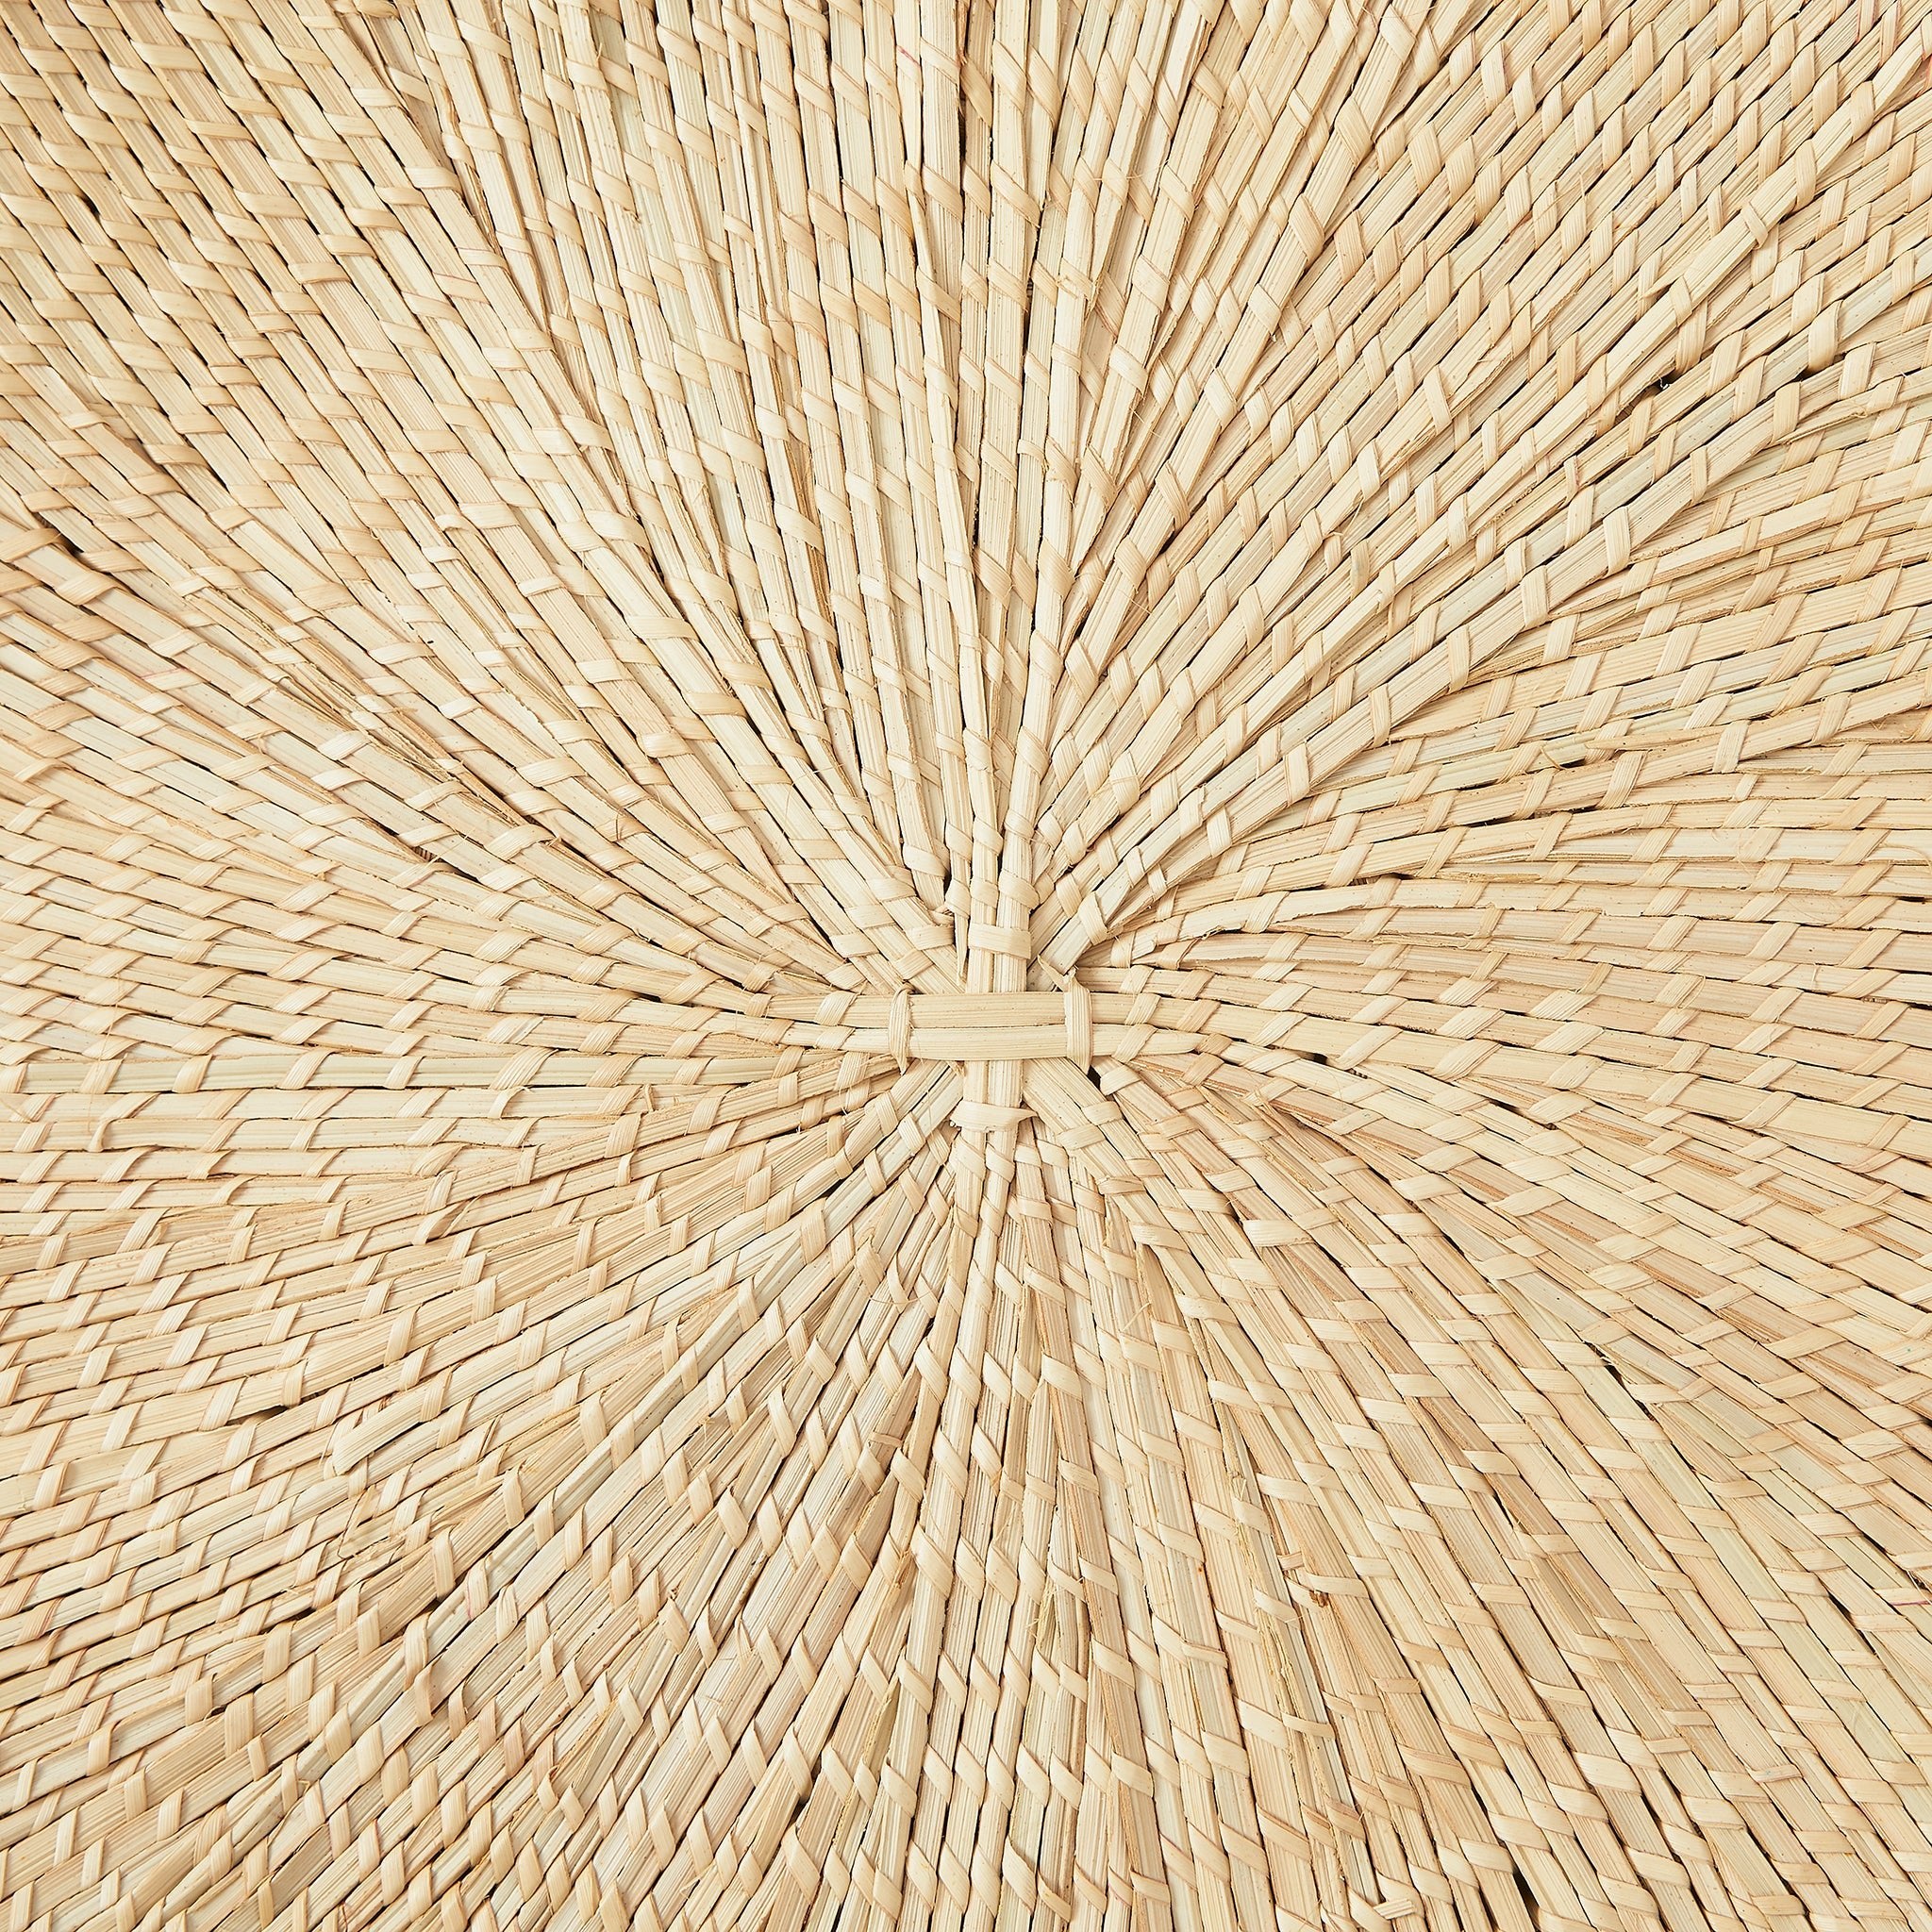 Close-up: BY NATIVE Sun Plate Medium, hand-woven from palm leaves in Malawi